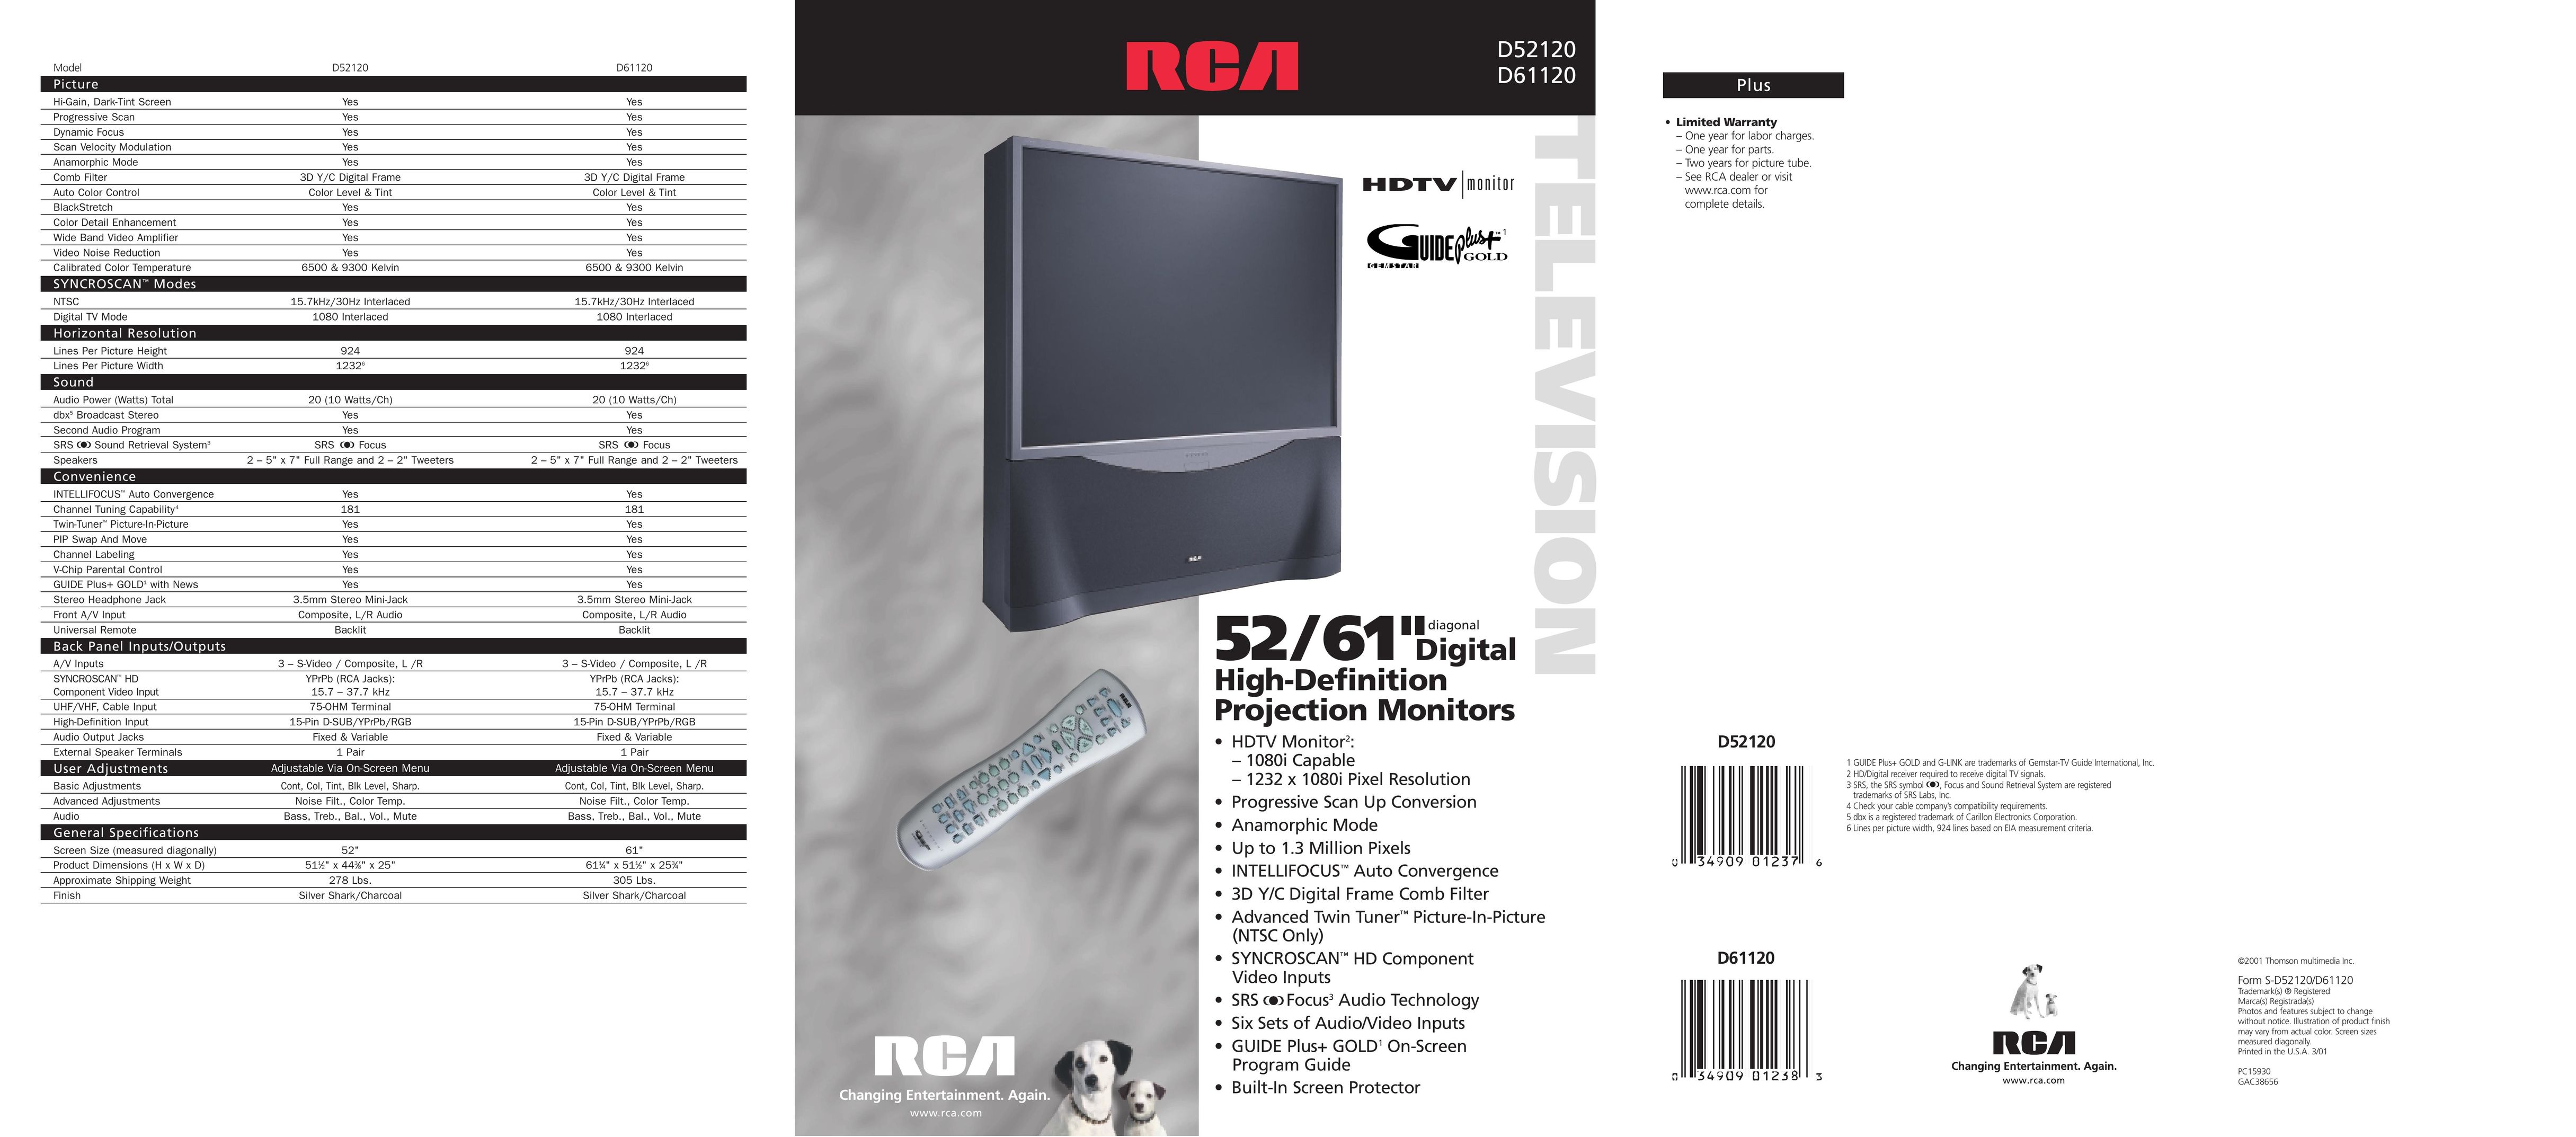 RCA D61120 Projection Television User Manual